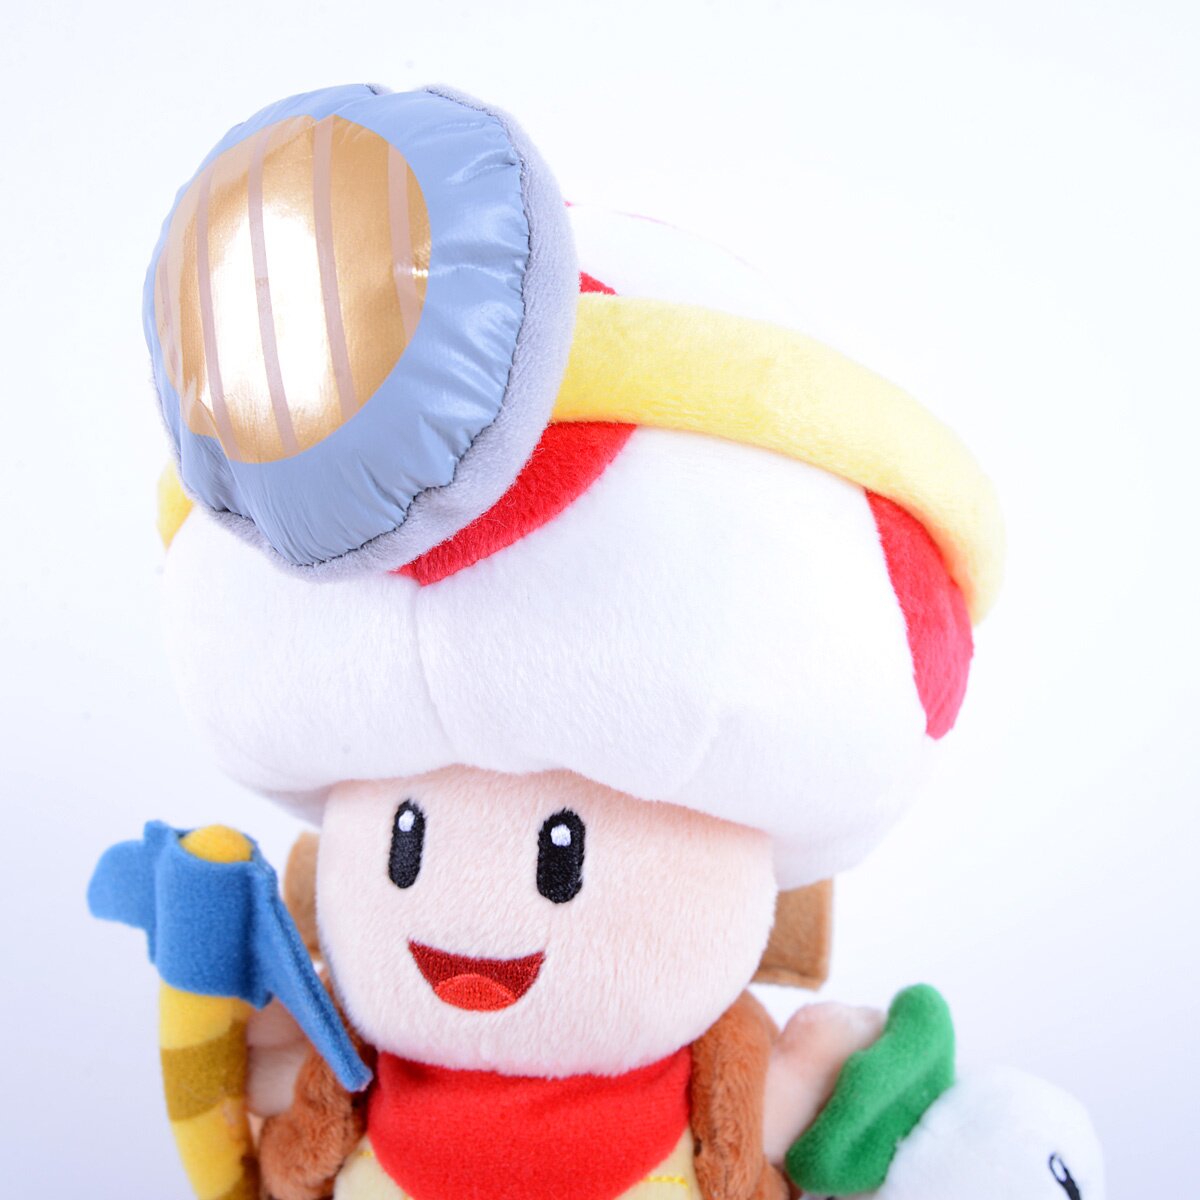  Little Buddy Super Mario Bros. Captain Toad Standing Pose Stuffed  Plush, 9, Multi-Colored (1409) : Toys & Games